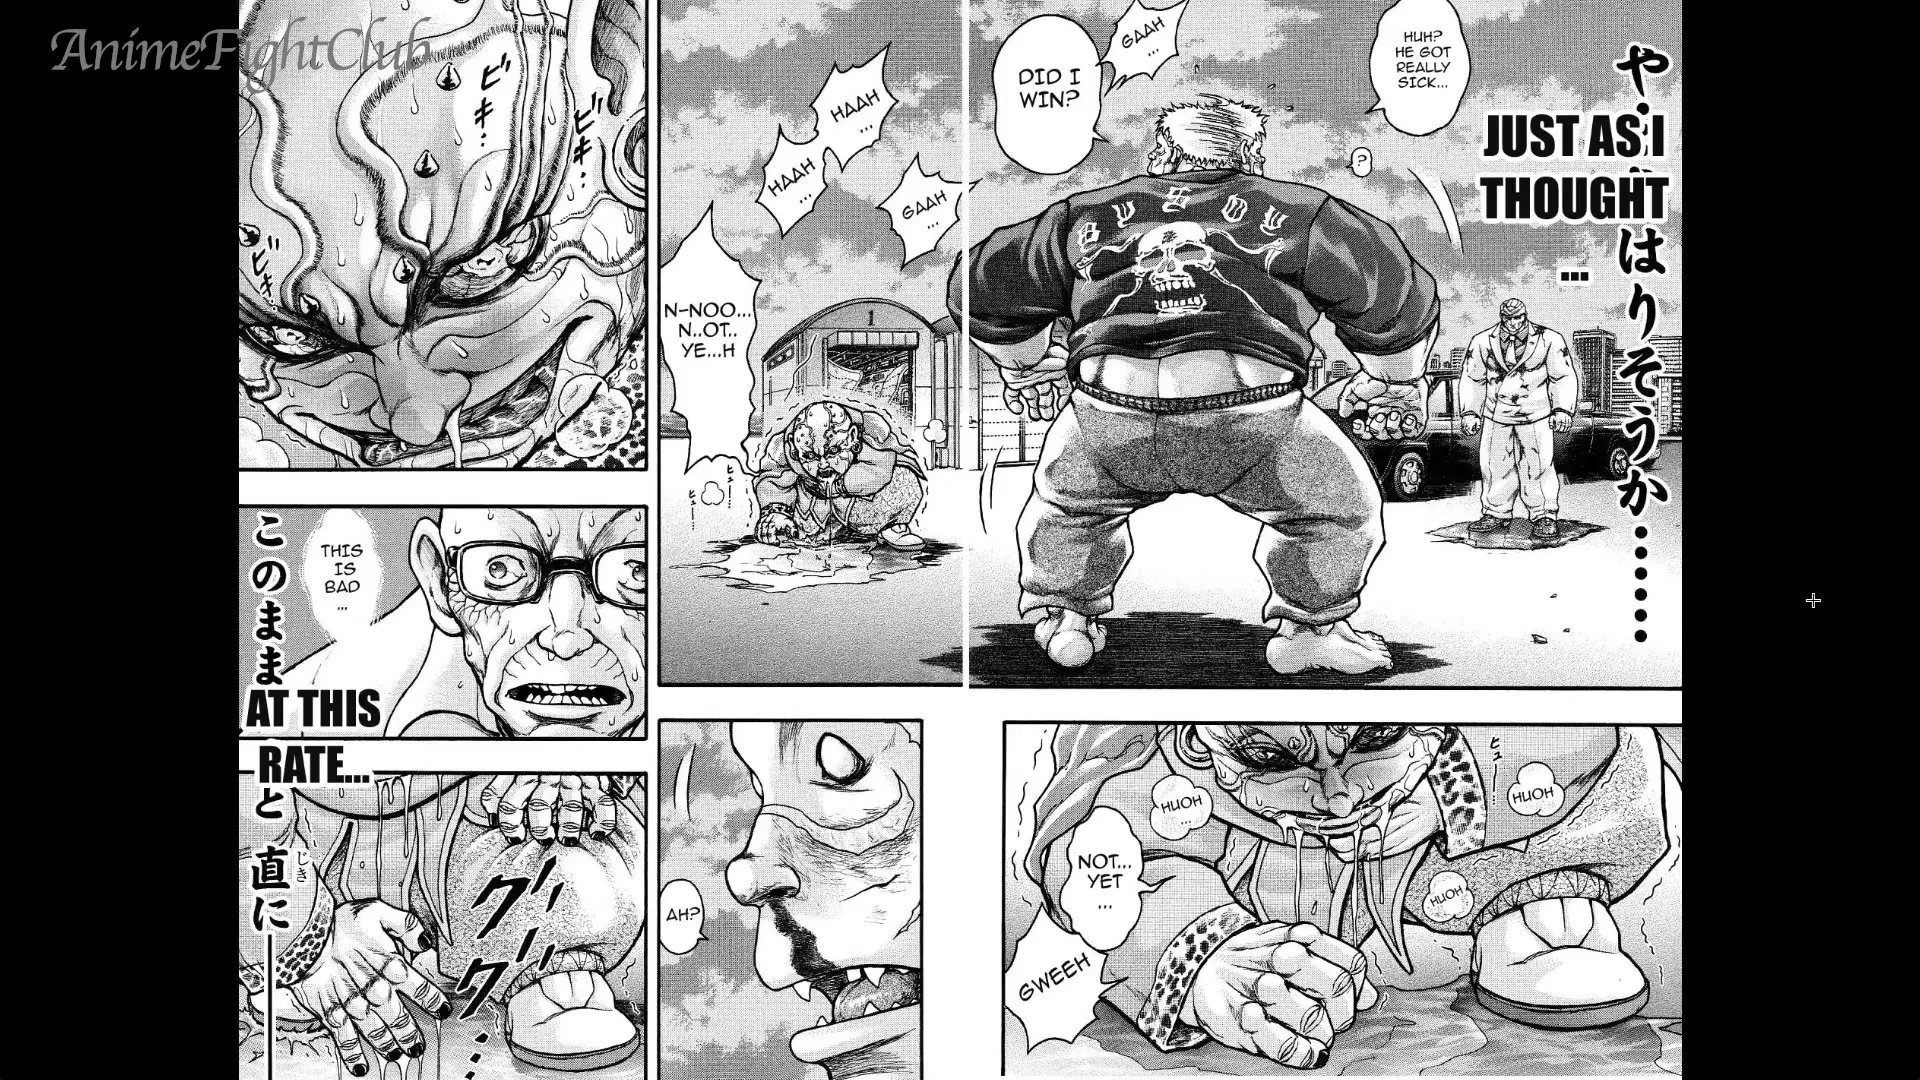 In New Grappler Baki, who would have won if Hanayama instead